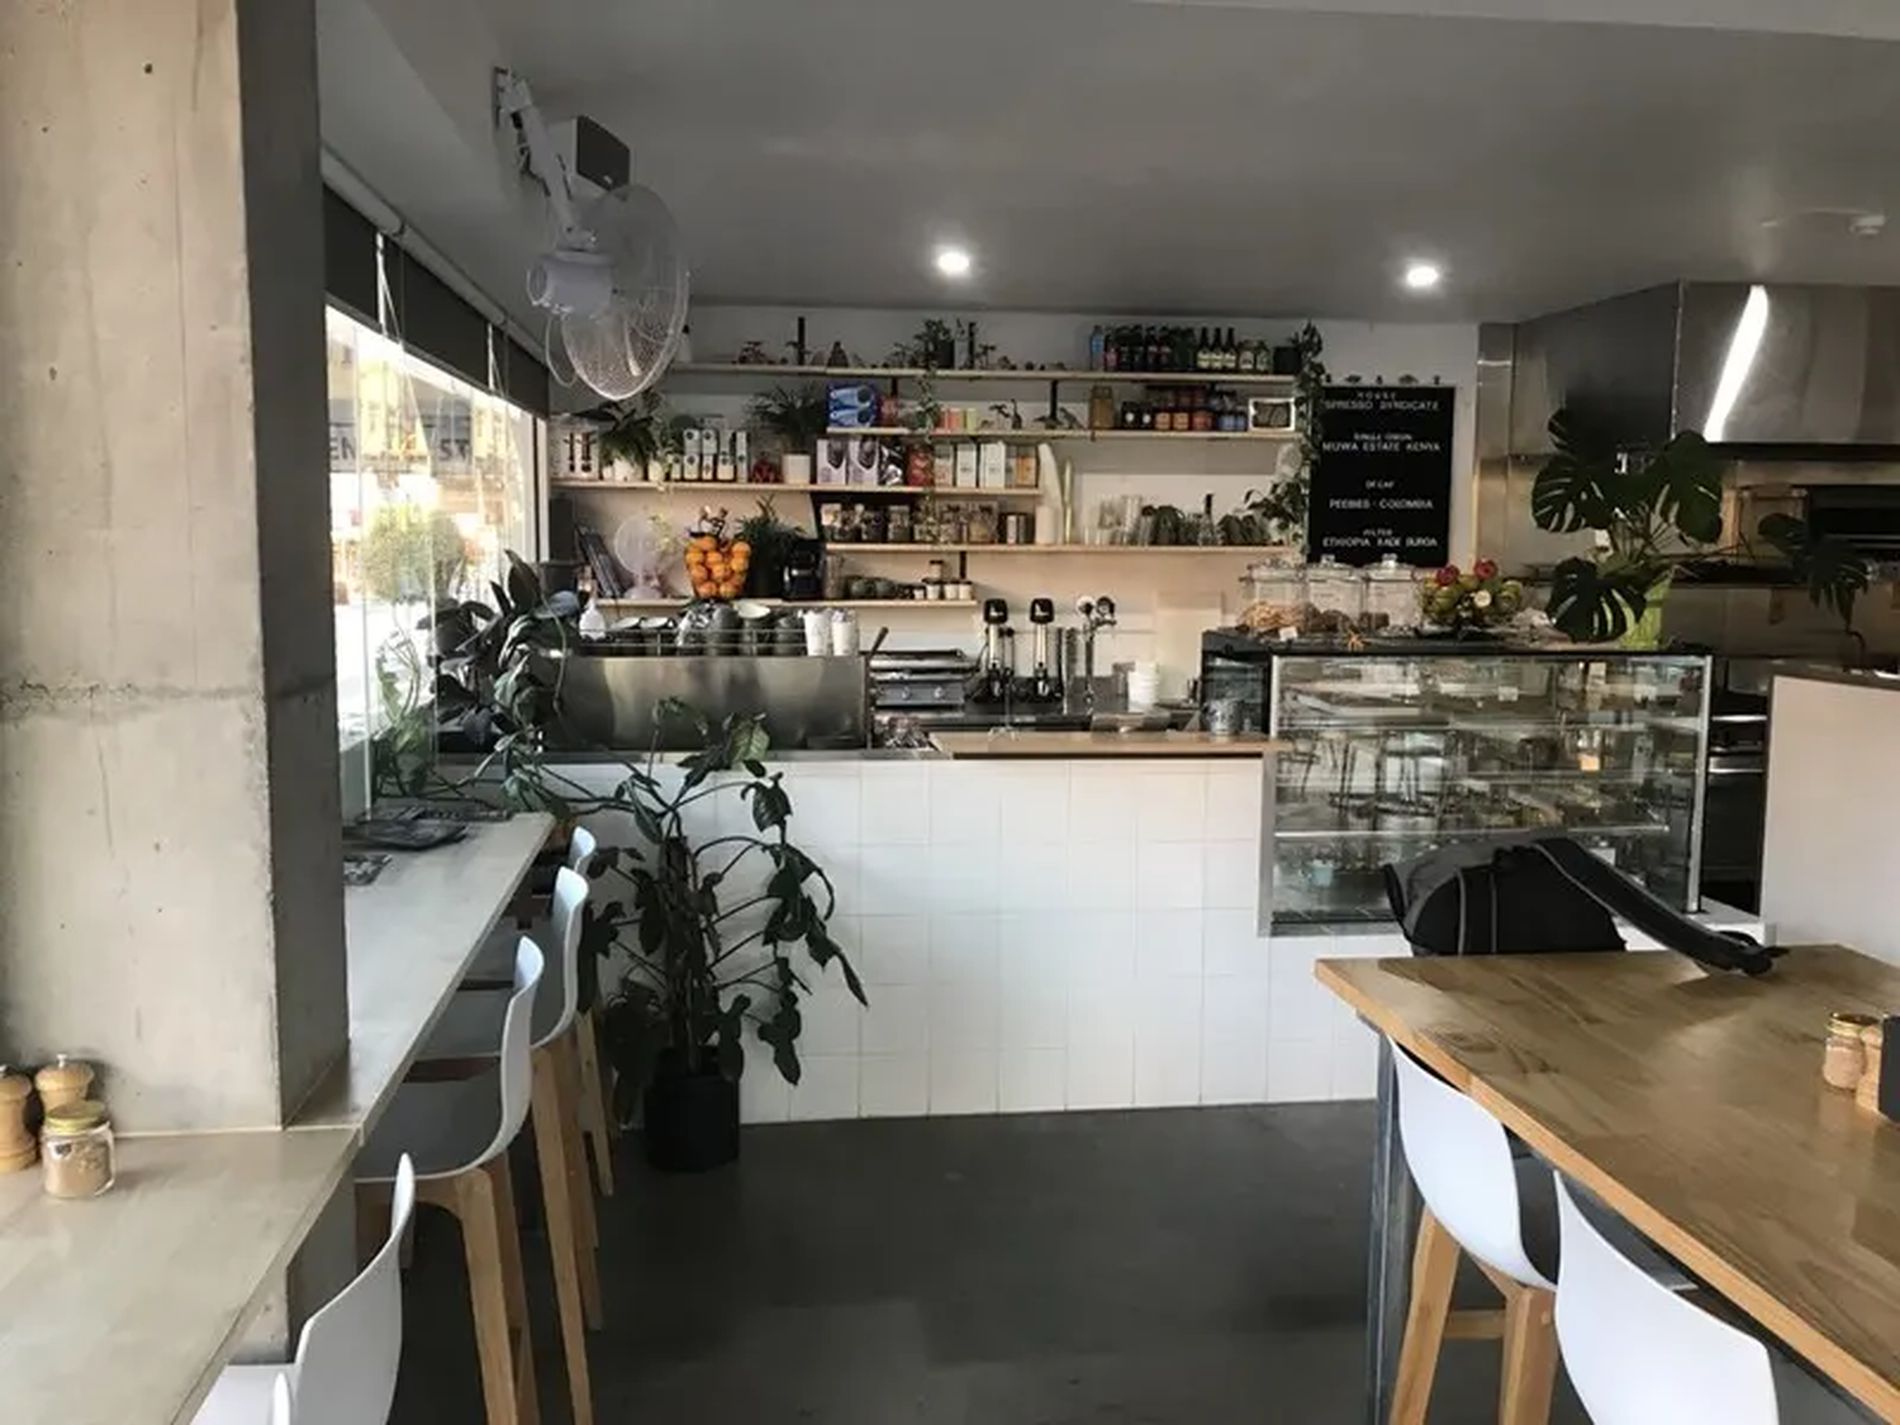 Under Offer - Cafe and Takeaway Business for Sale Caulfield
